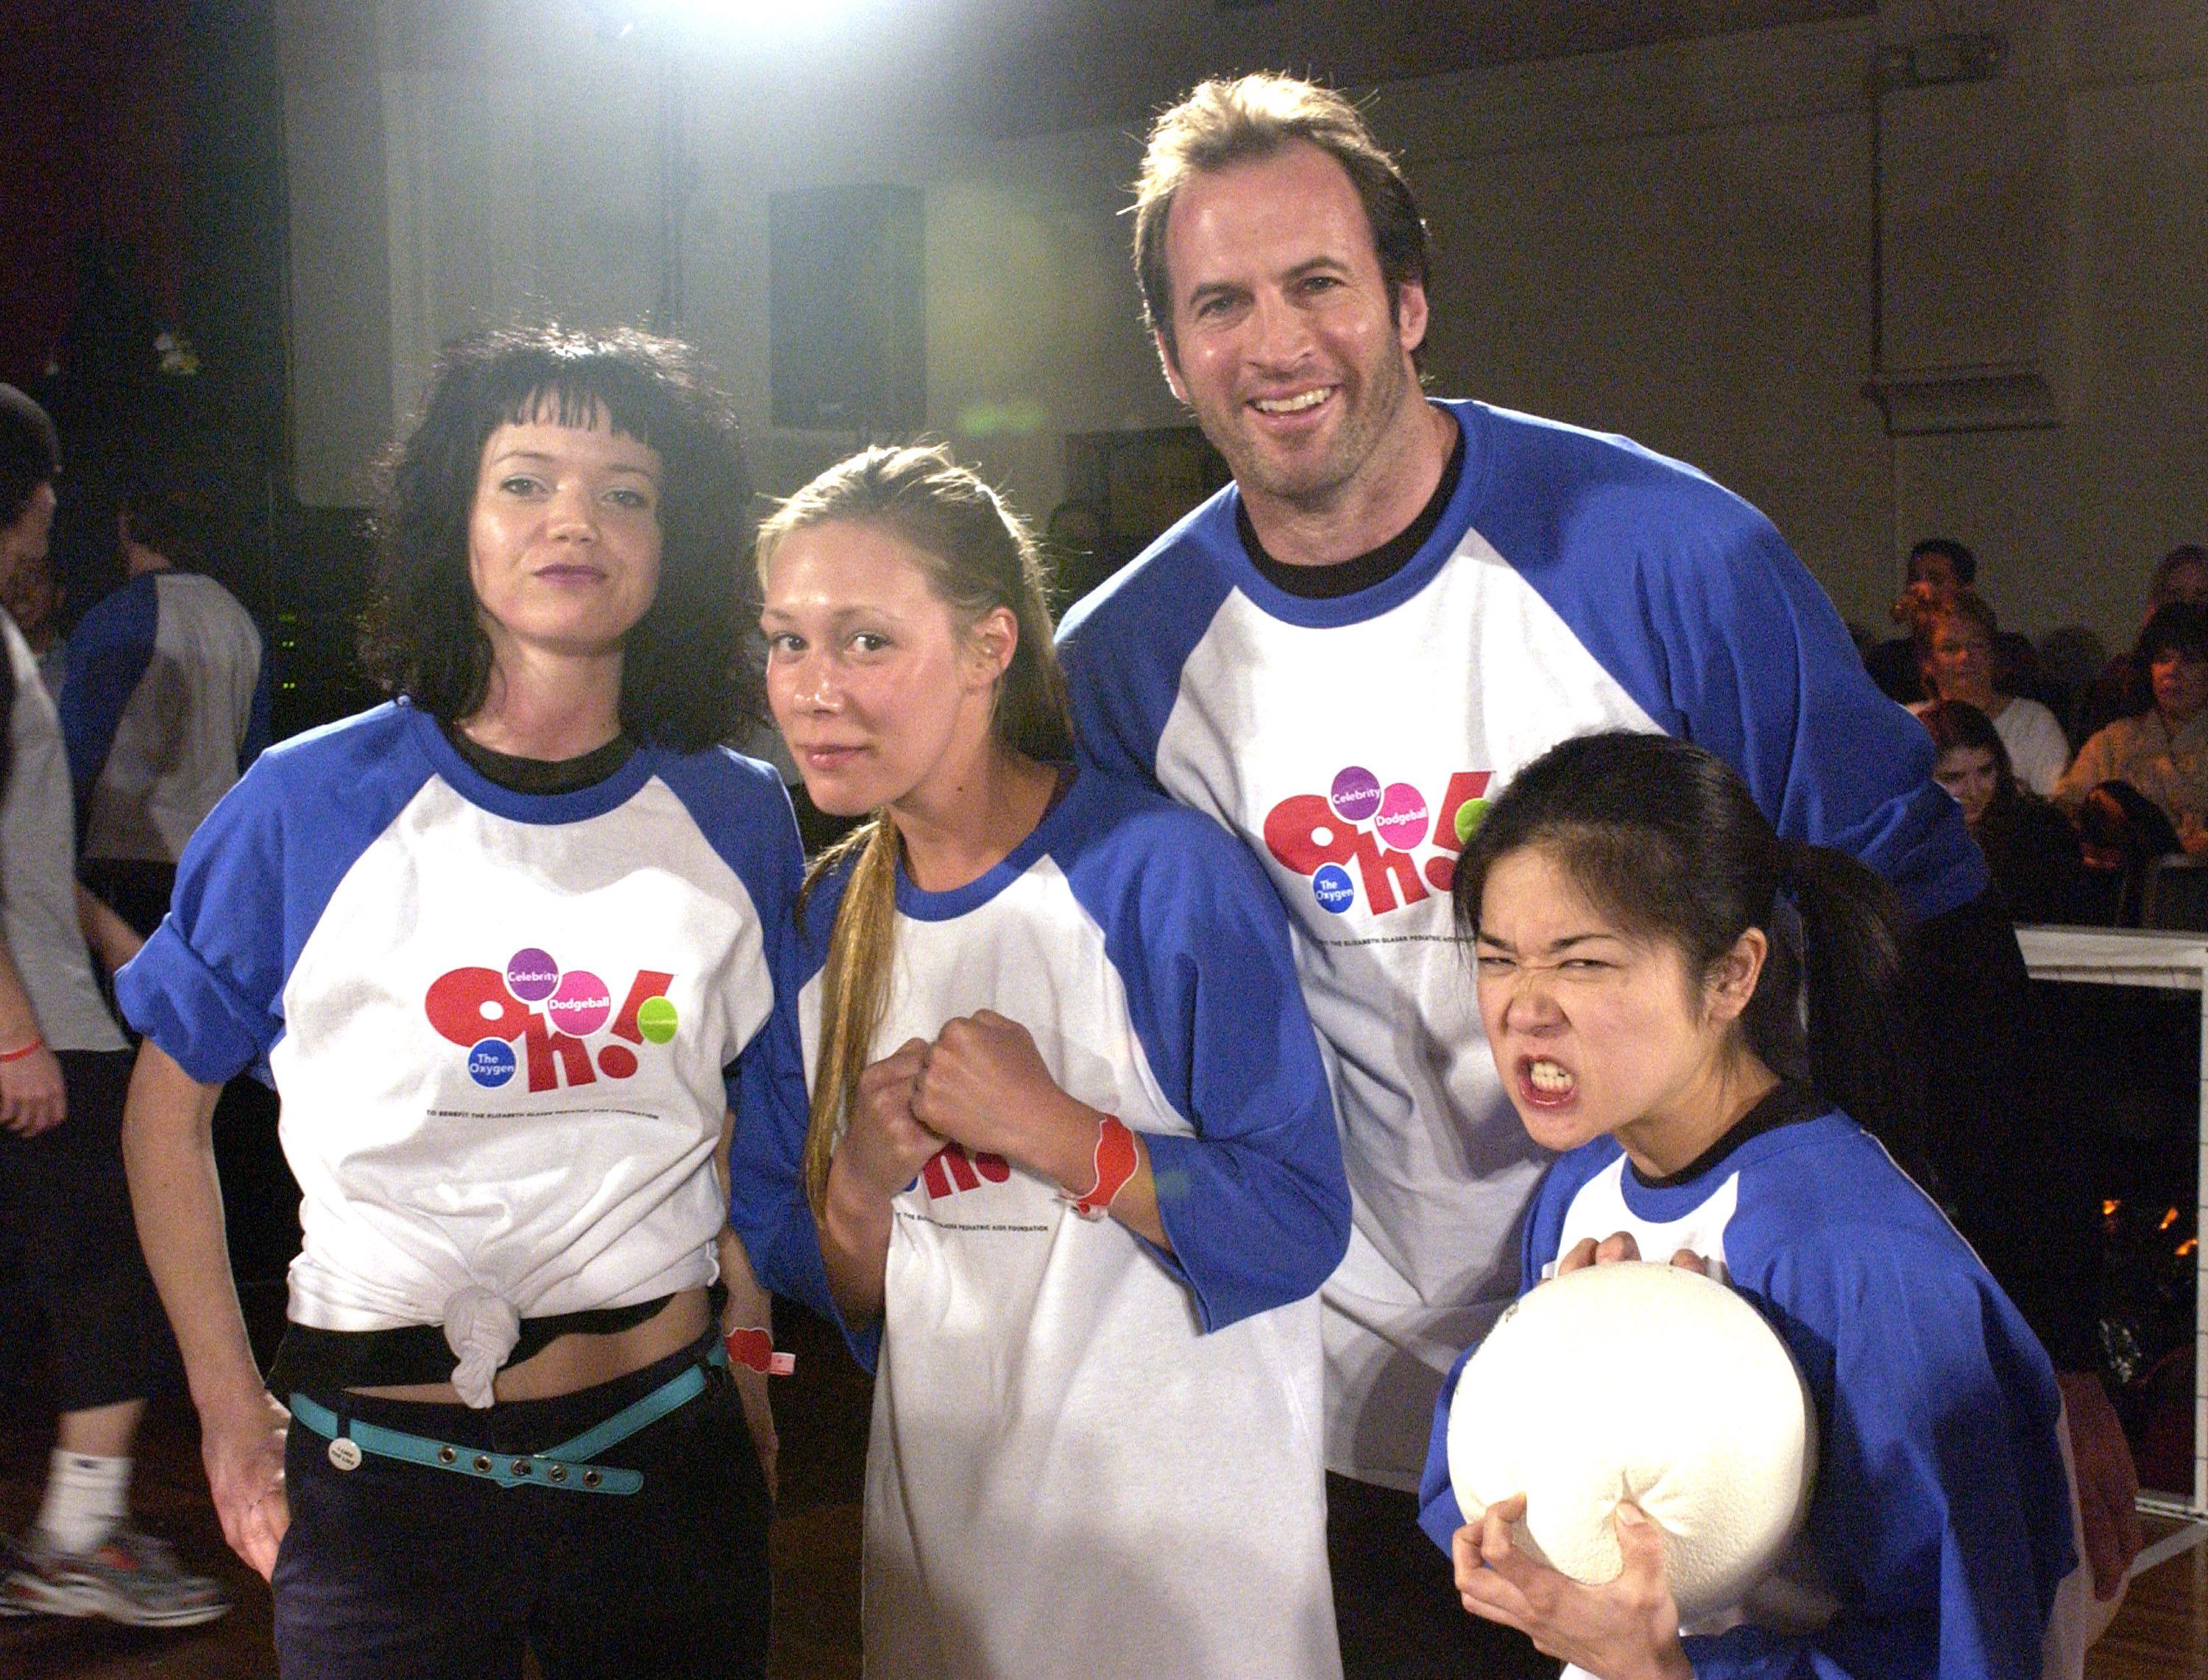 Shelly Cole, Liza Weil, Scott Patterson, and Keiko Agena, as Team WB, pose for a photo at Oxygen's Celebrity Dodgeball Tournament in 2003.